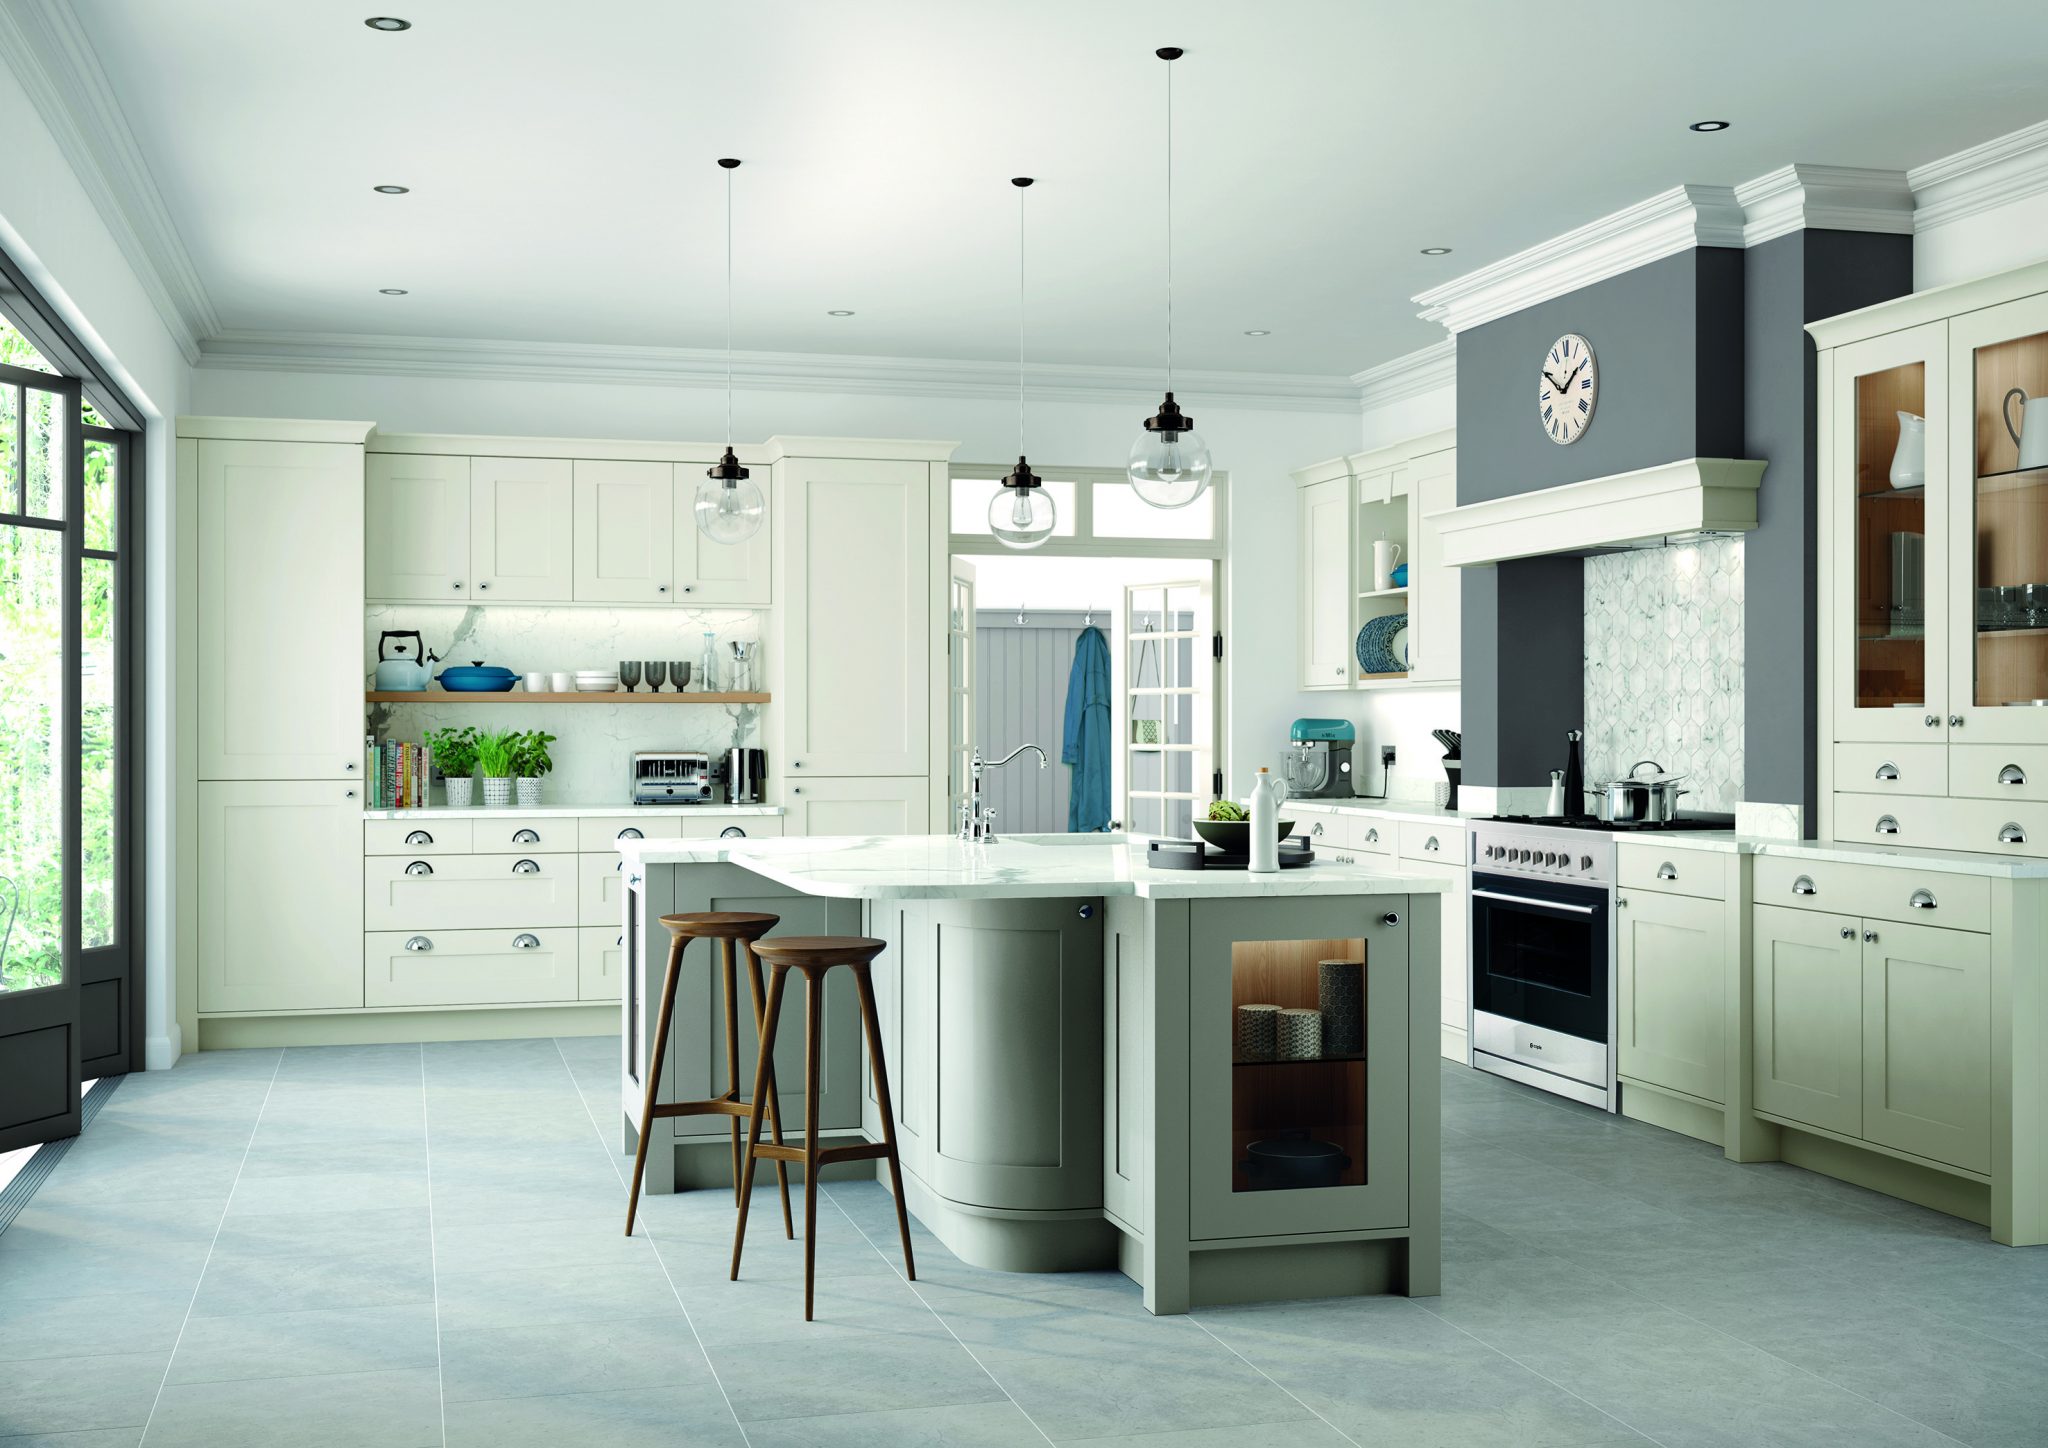 Painted perfection with Caple’s Pesaro kitchen